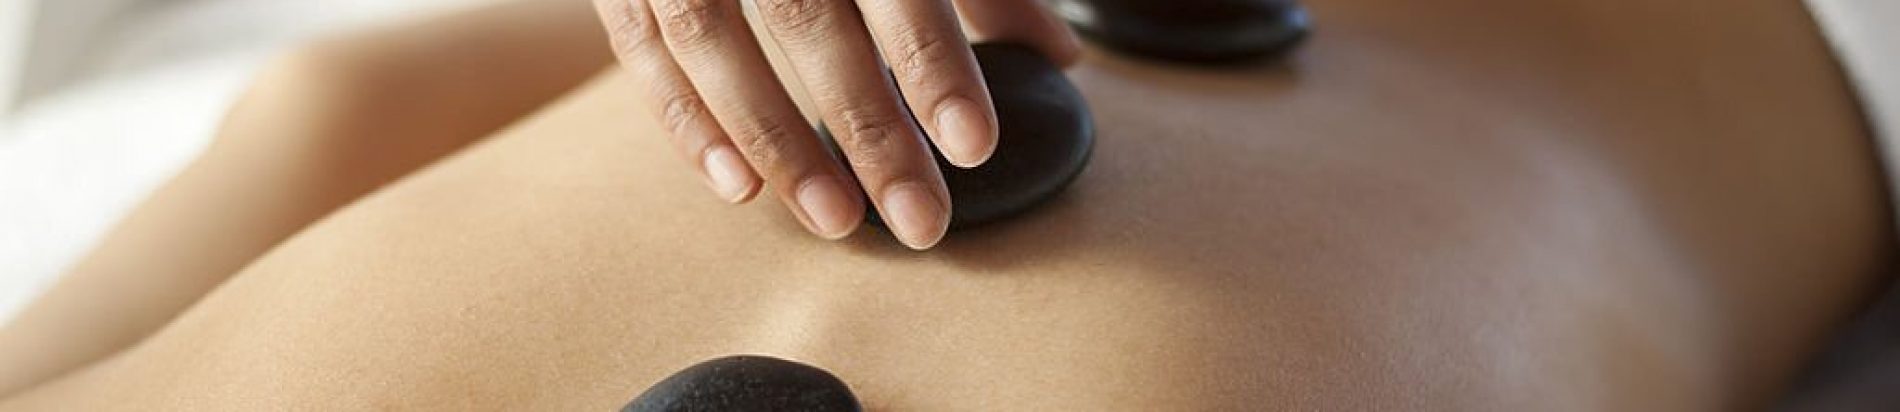 Instep® Massage Center Provides Best Hot Stone Massage Therapy In Edmonton. We Focuses on Variety of Lymphatic Massage Services.